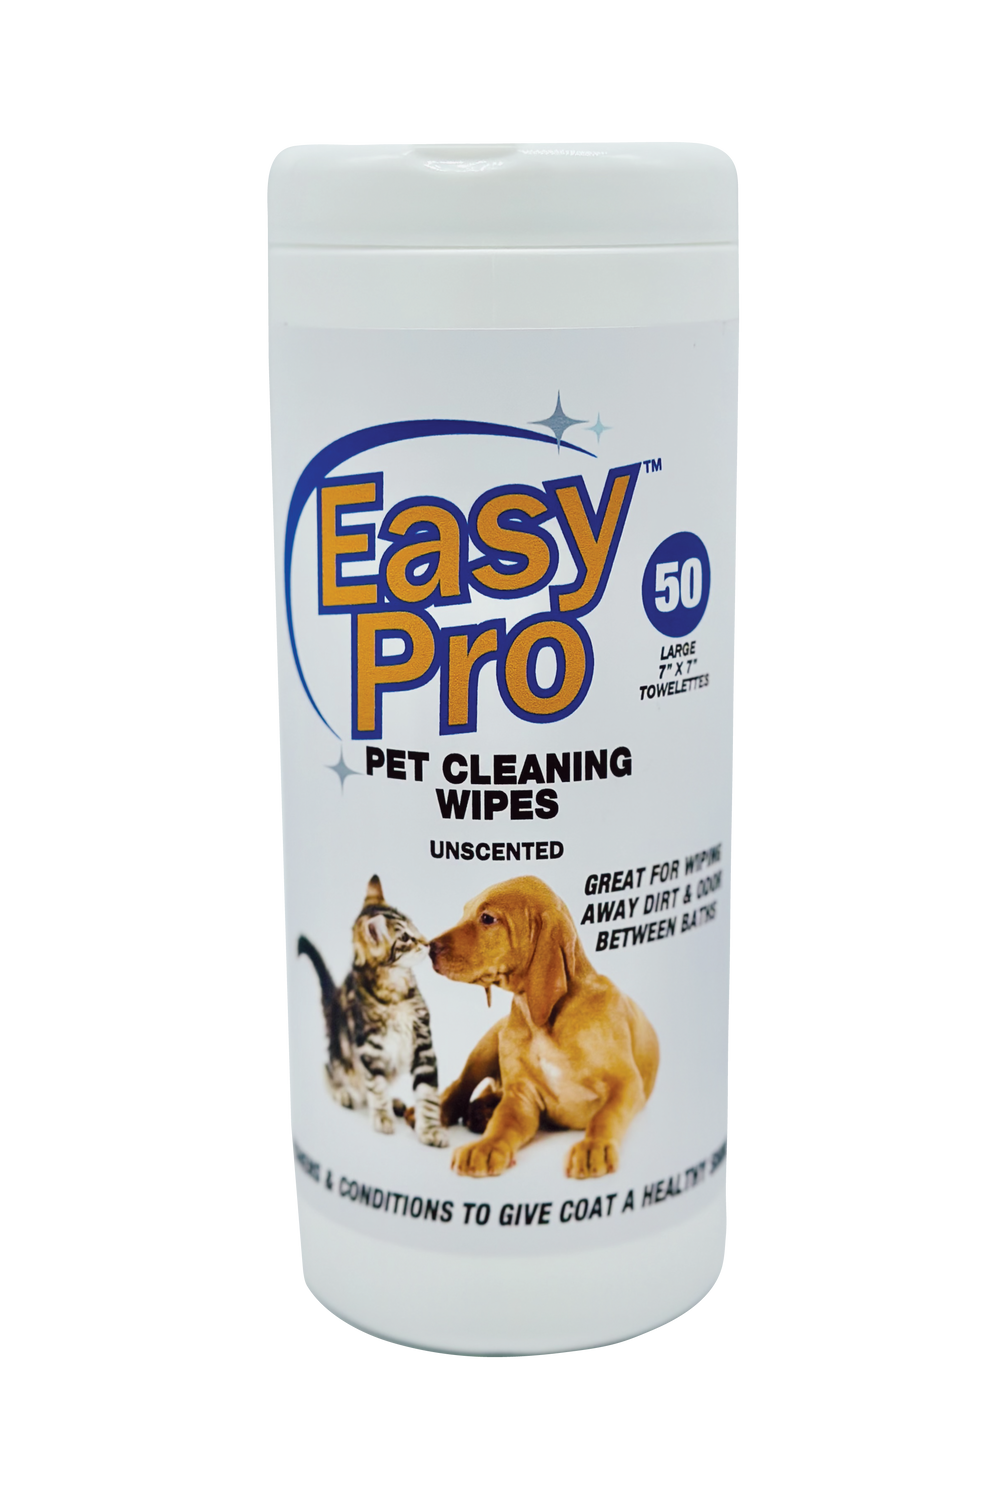 Easy Pro Pet Cleaning Wipes - Unscented - 50ct, 8 canister per case